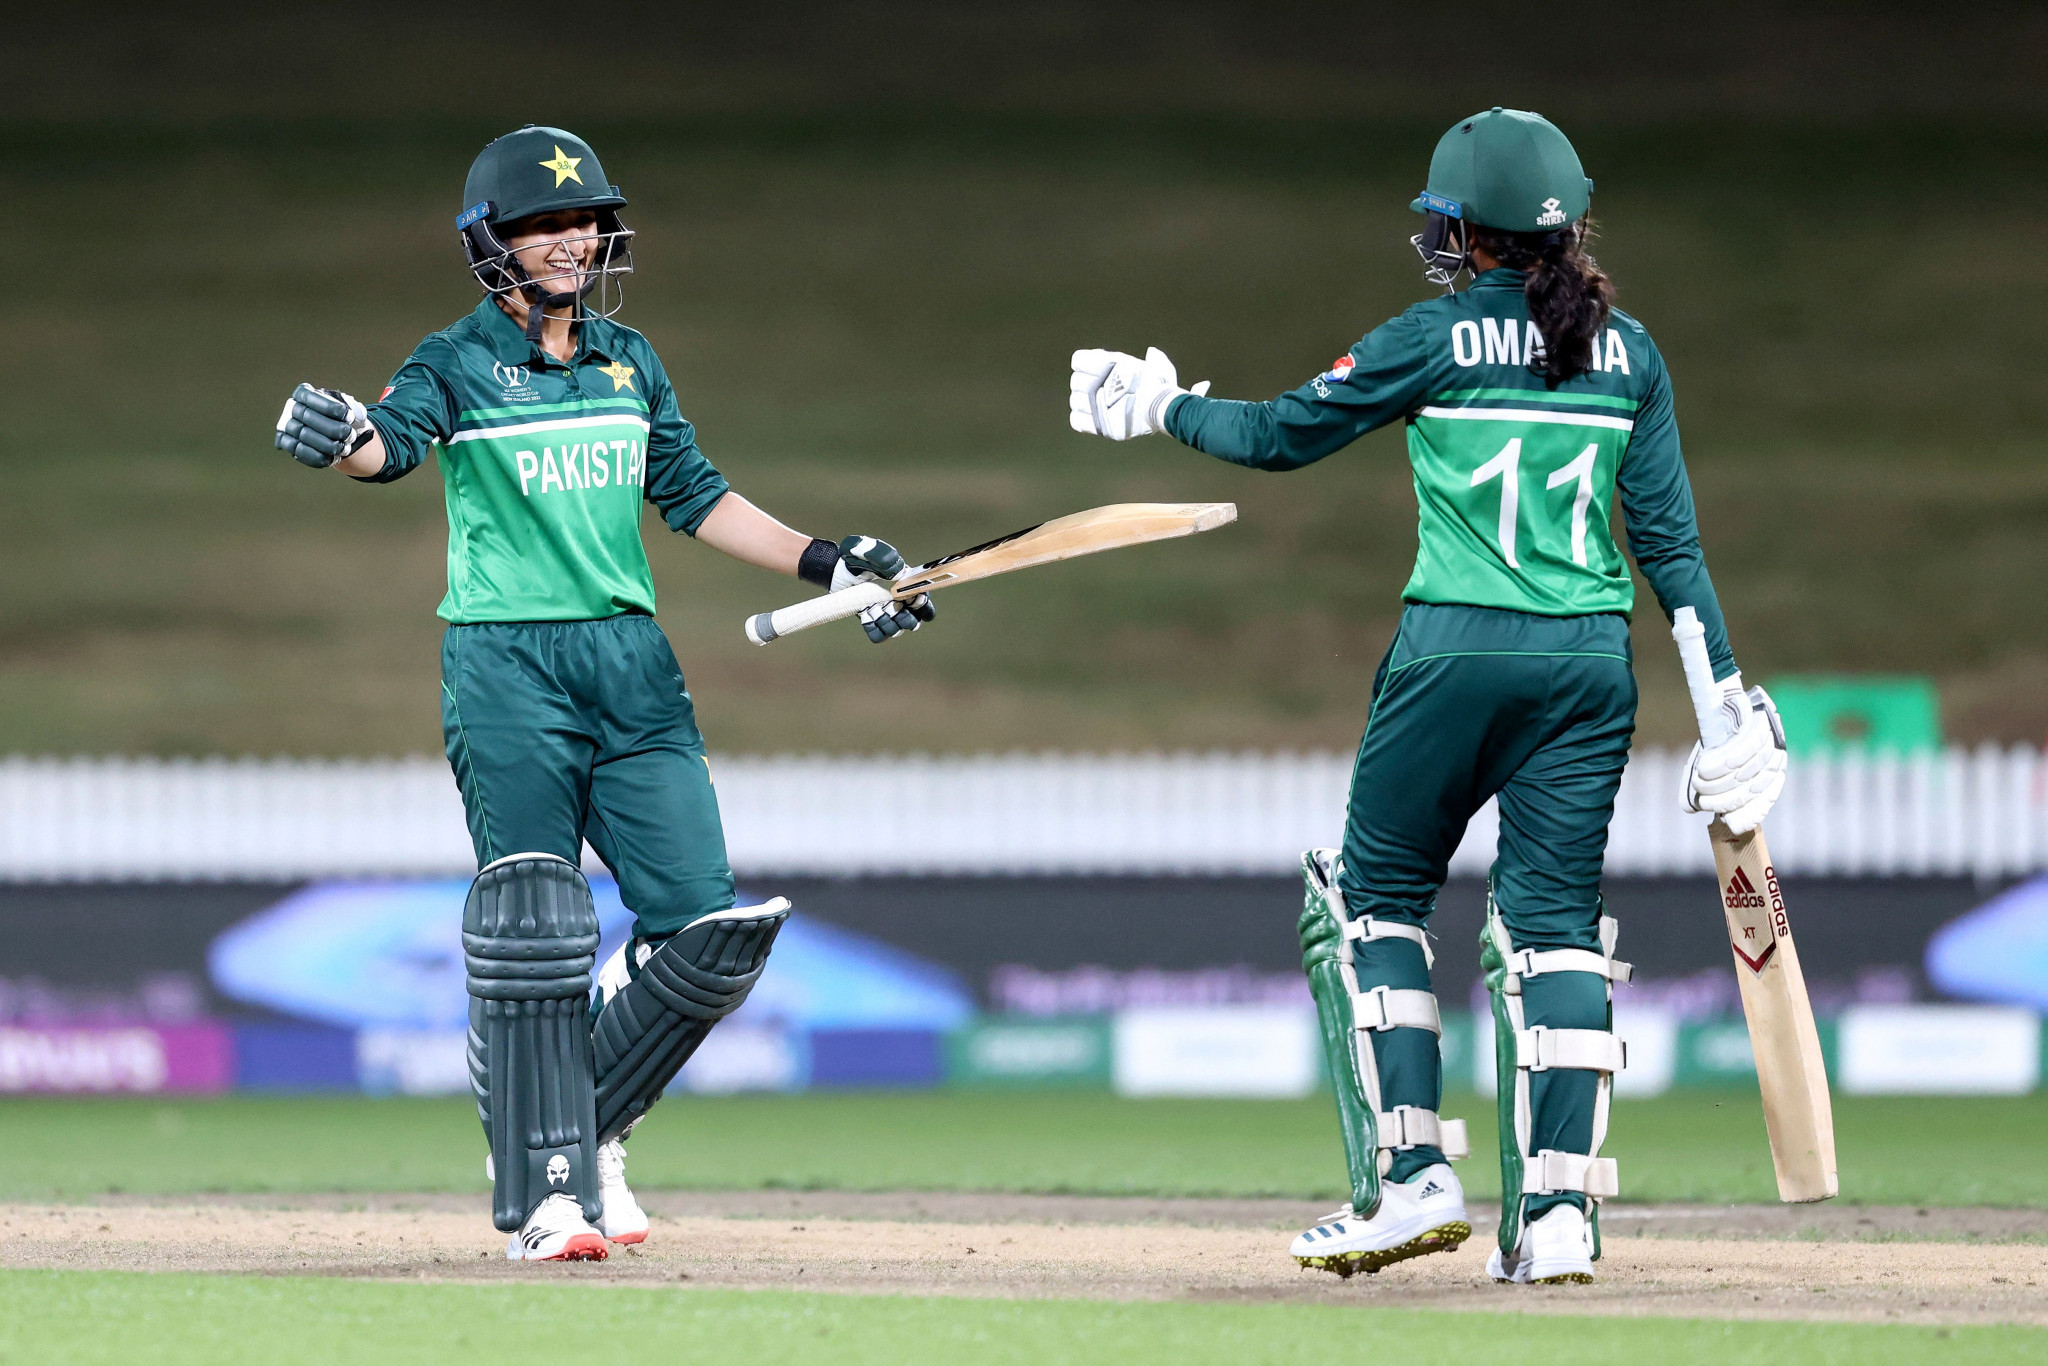 Pakistan beat West Indies by eight wickets for their first victory in the Women's Cricket World Cup for 13 years ©Getty Images